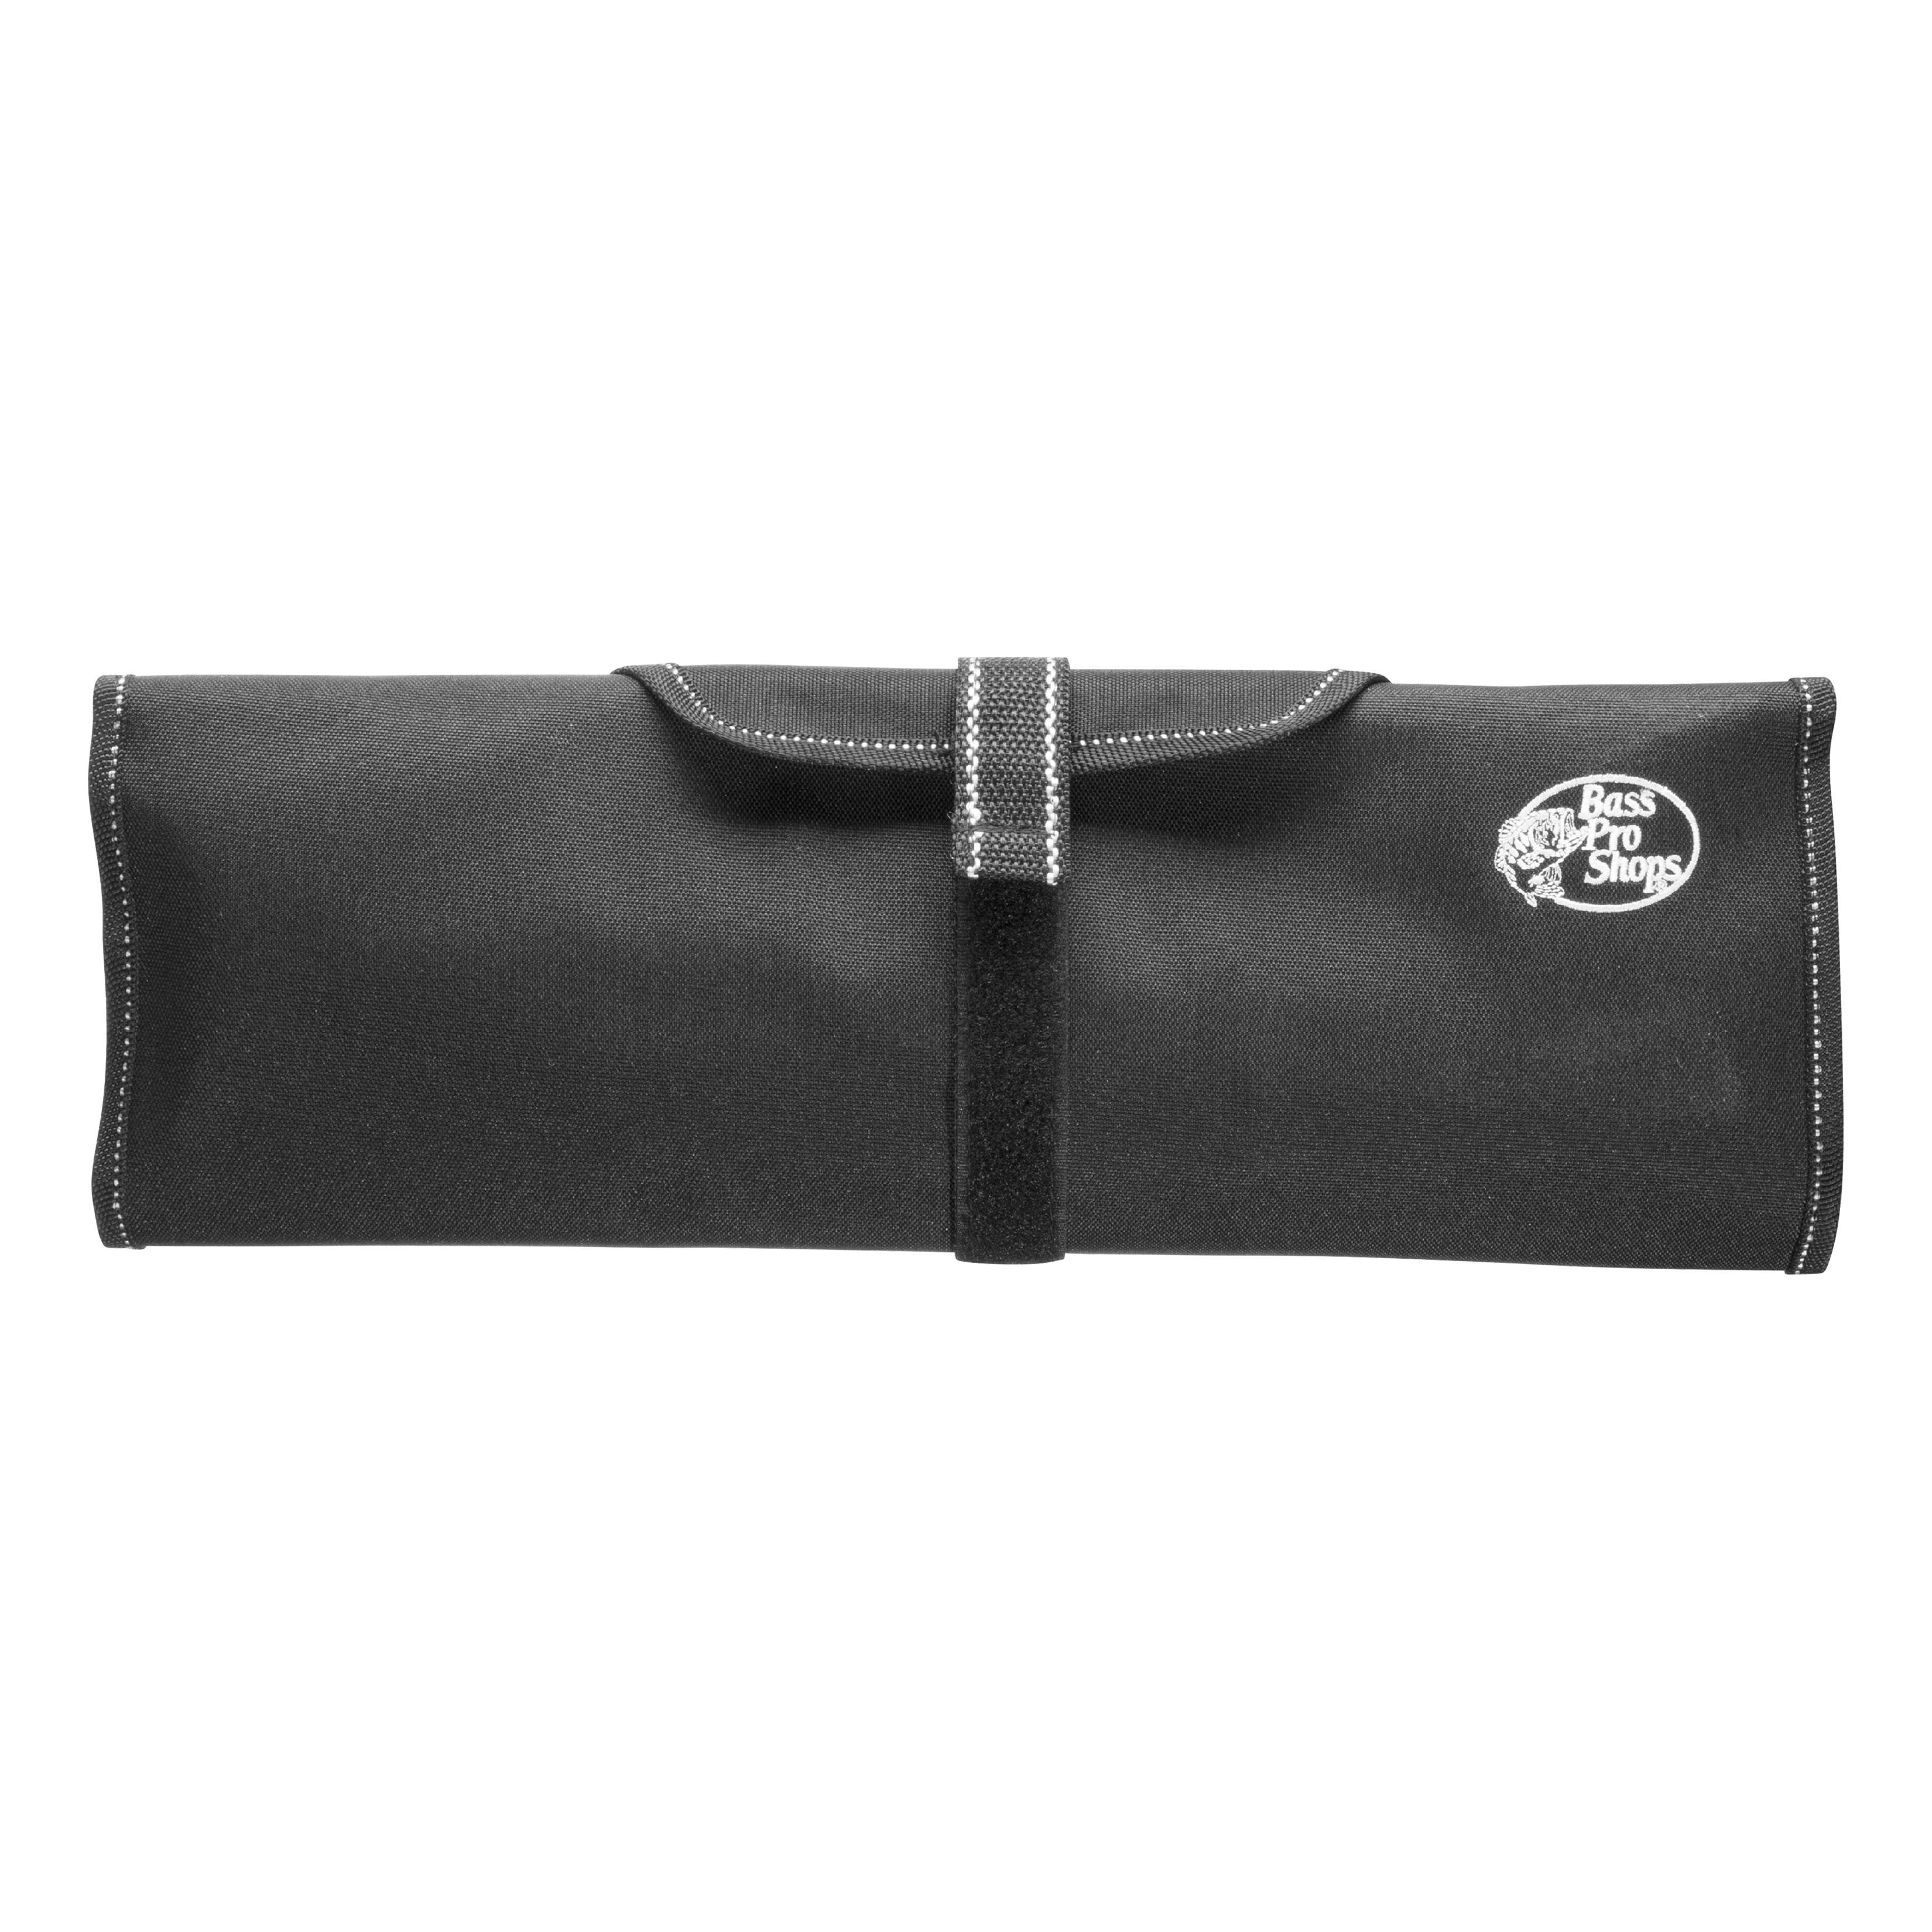 Bass Pro Shops® Grip Master™ Fillet Kit - Roll-Up Safety Case Closed View